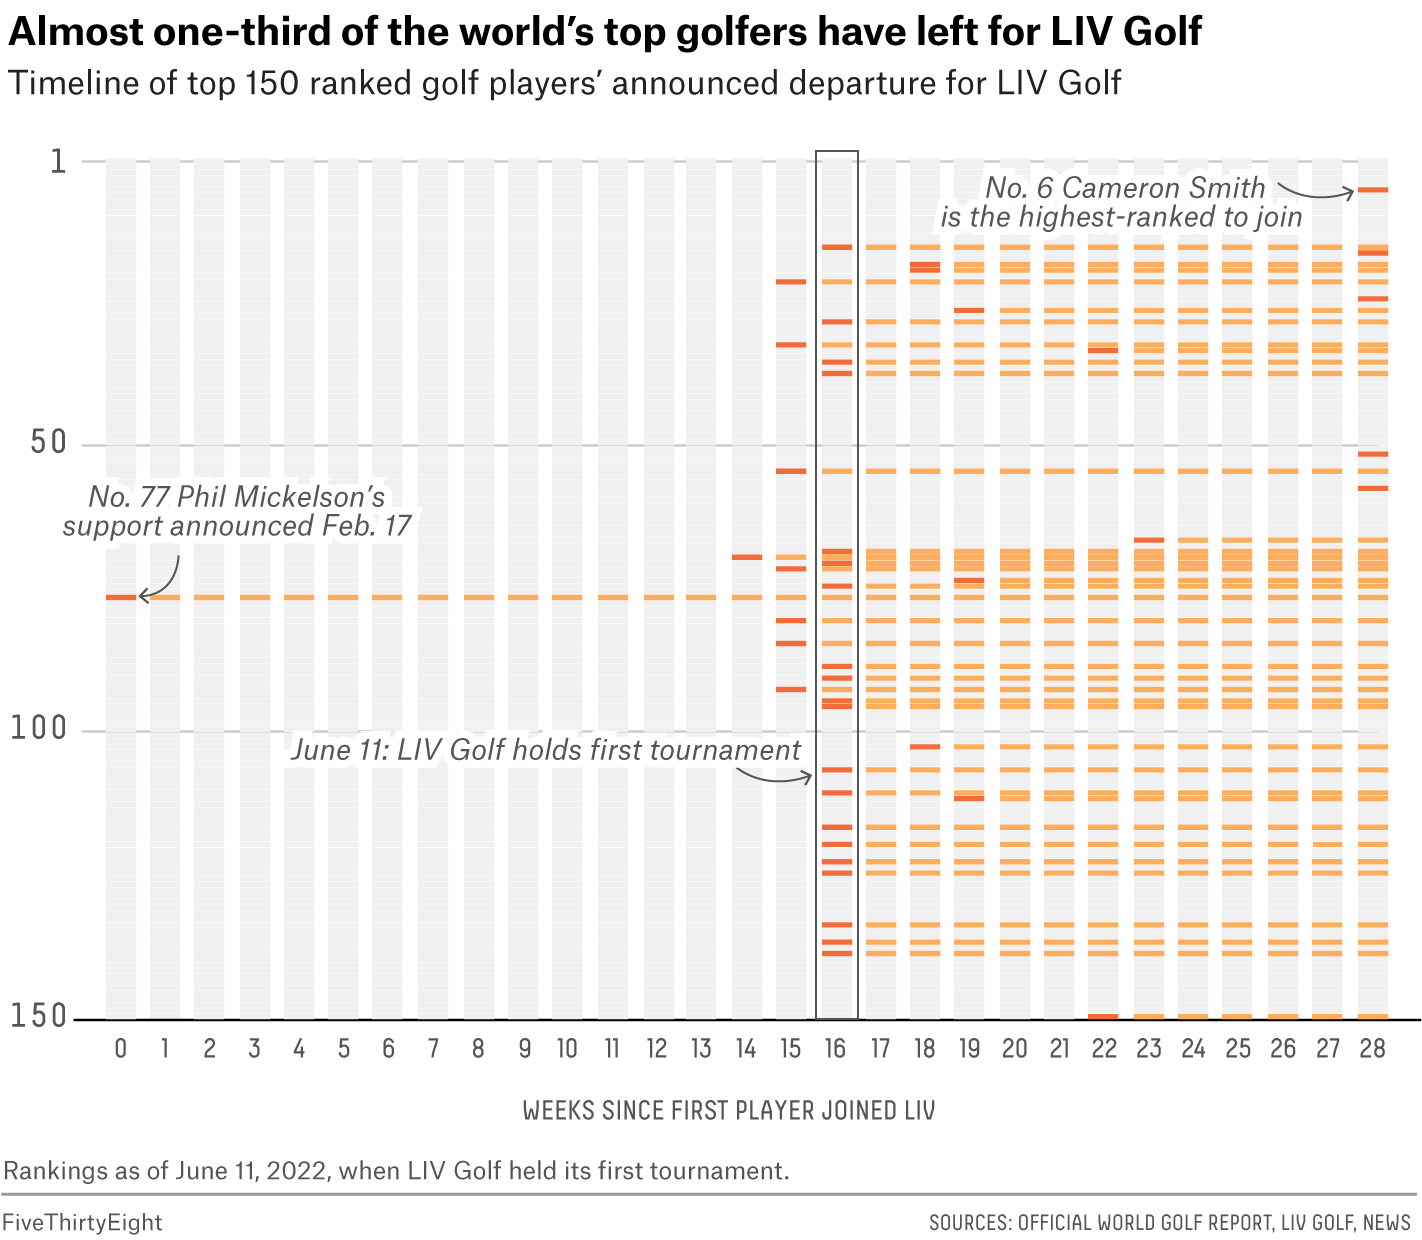 A timeline chart shows Phil Mickelson, the first player to join LIV on Feb. 17, 2022, and the 15 weeks before other players start to join. Most join the week before or the week of LIV’s first tournament. Ultimately, 44 out of 150 of golf’s top players have joined LIV.